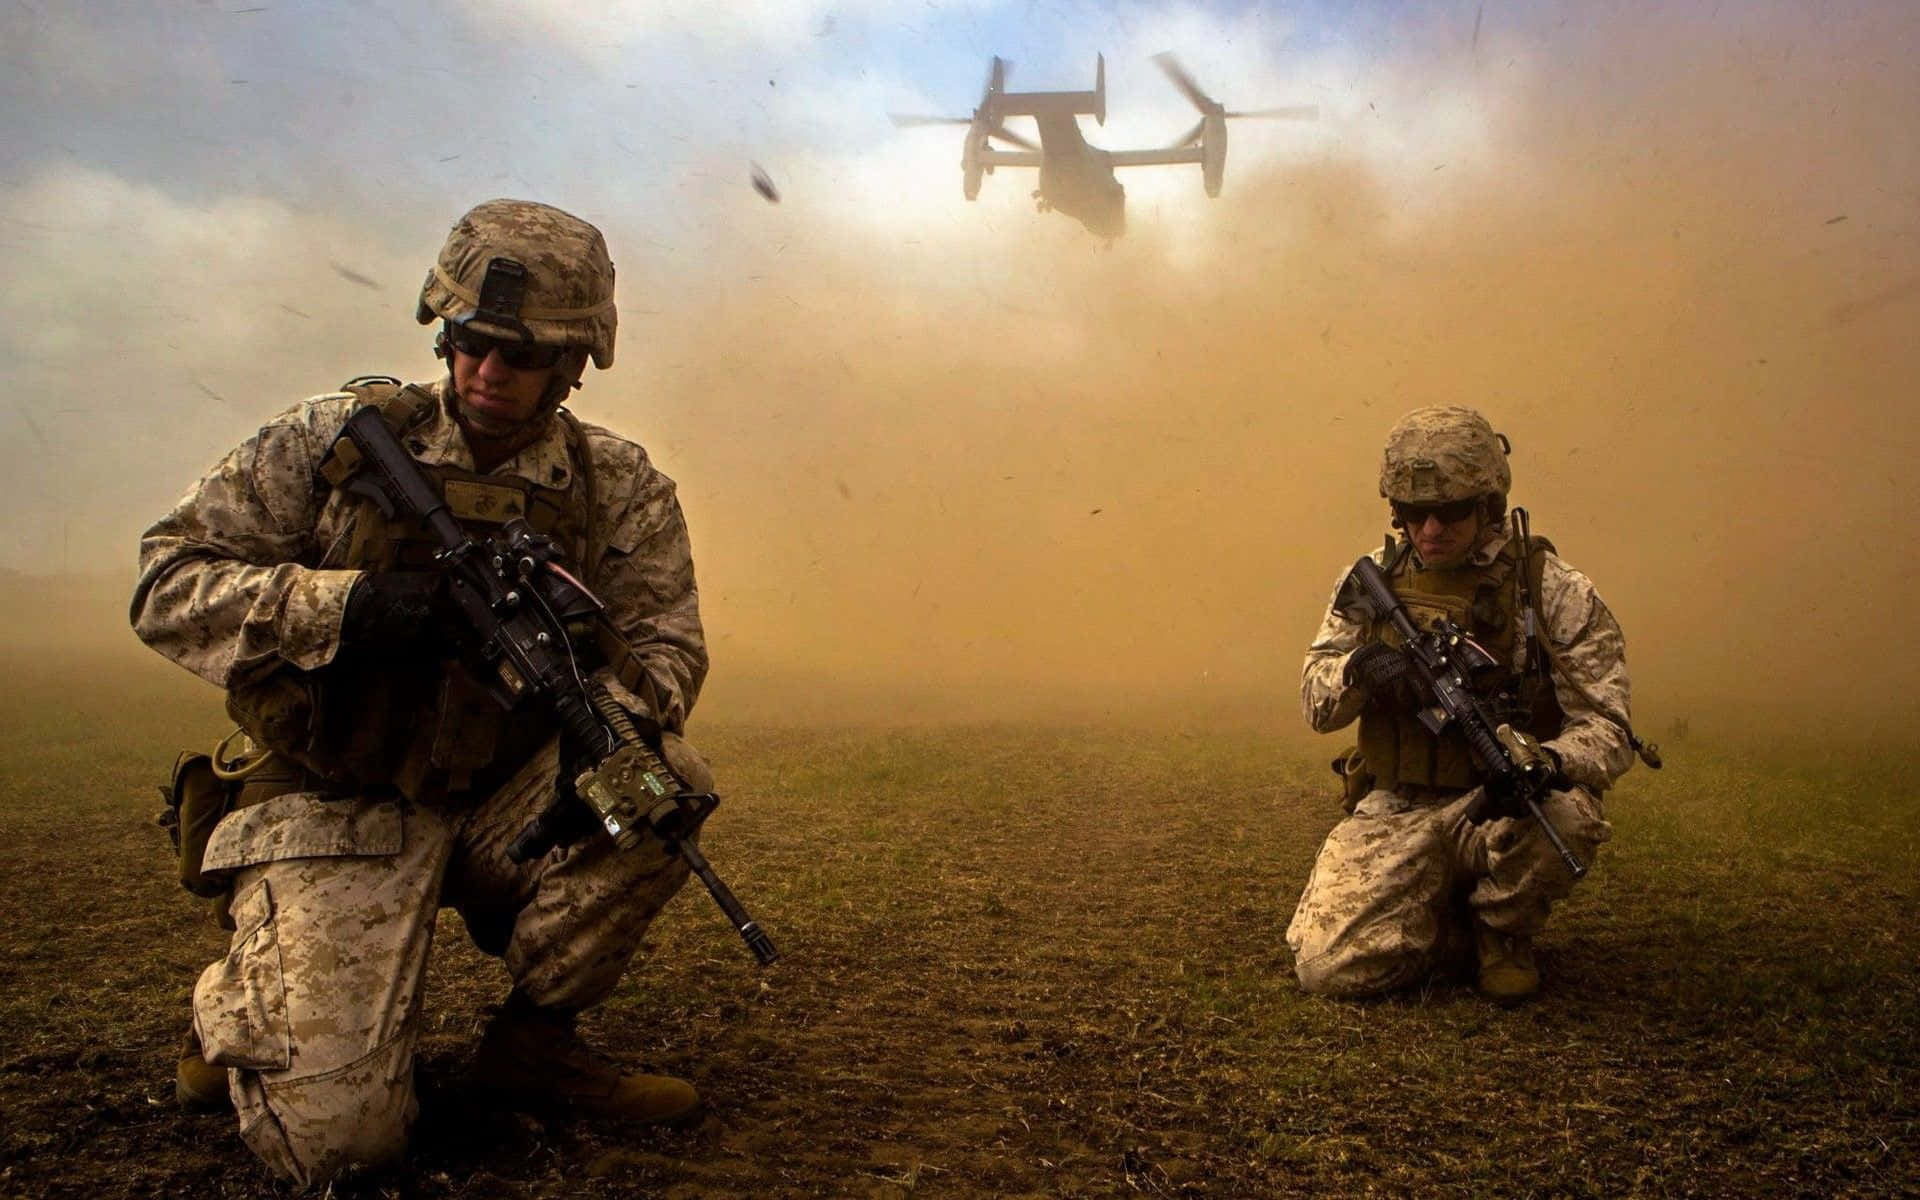 Image  U.S. Marines on patrol in the Middle East Wallpaper